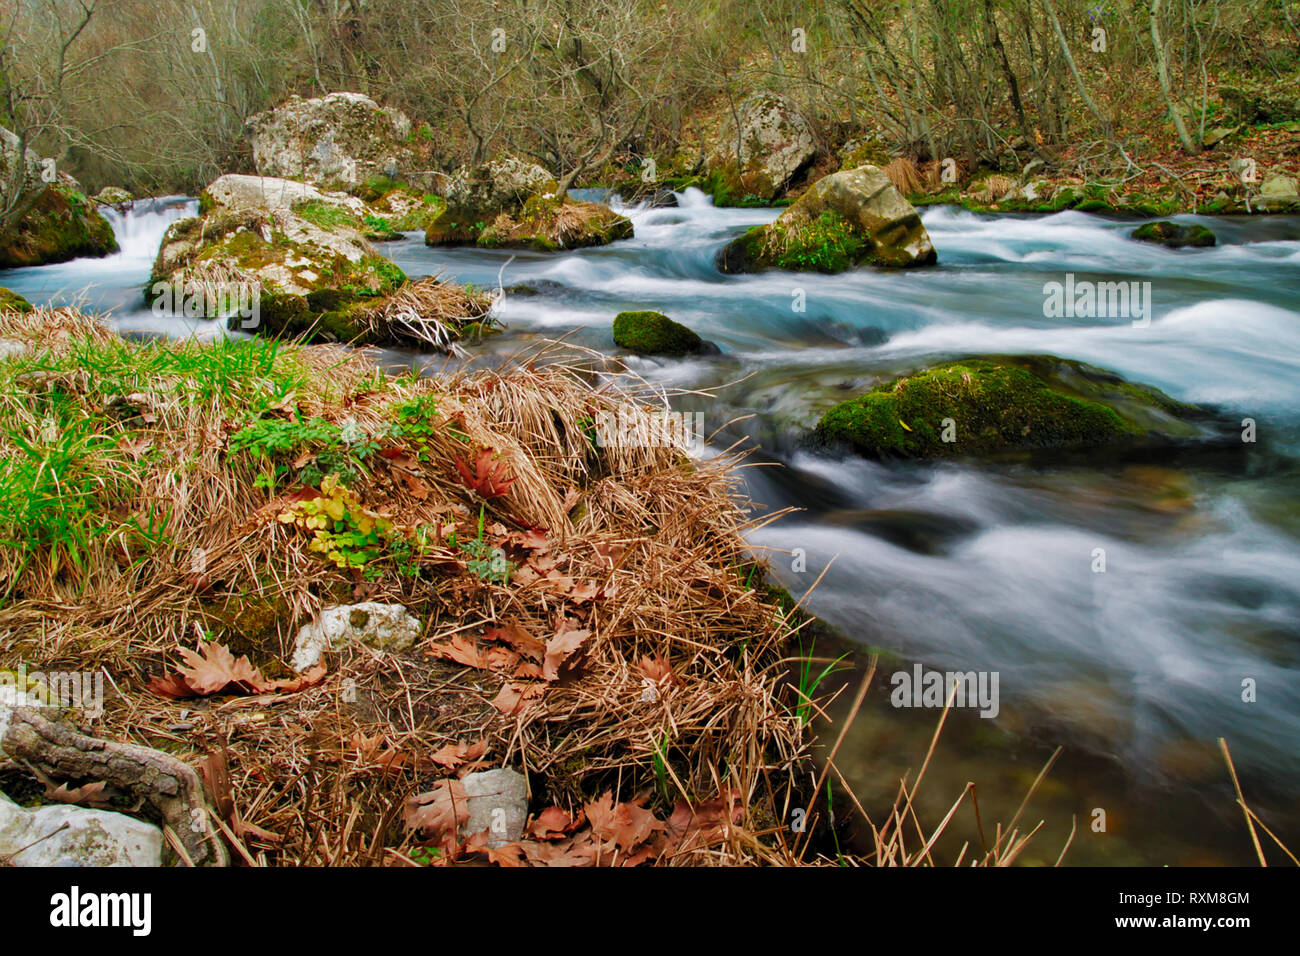 Lousios river in Peloponnese, Greece. Long exposure, water effect. Stock Photo